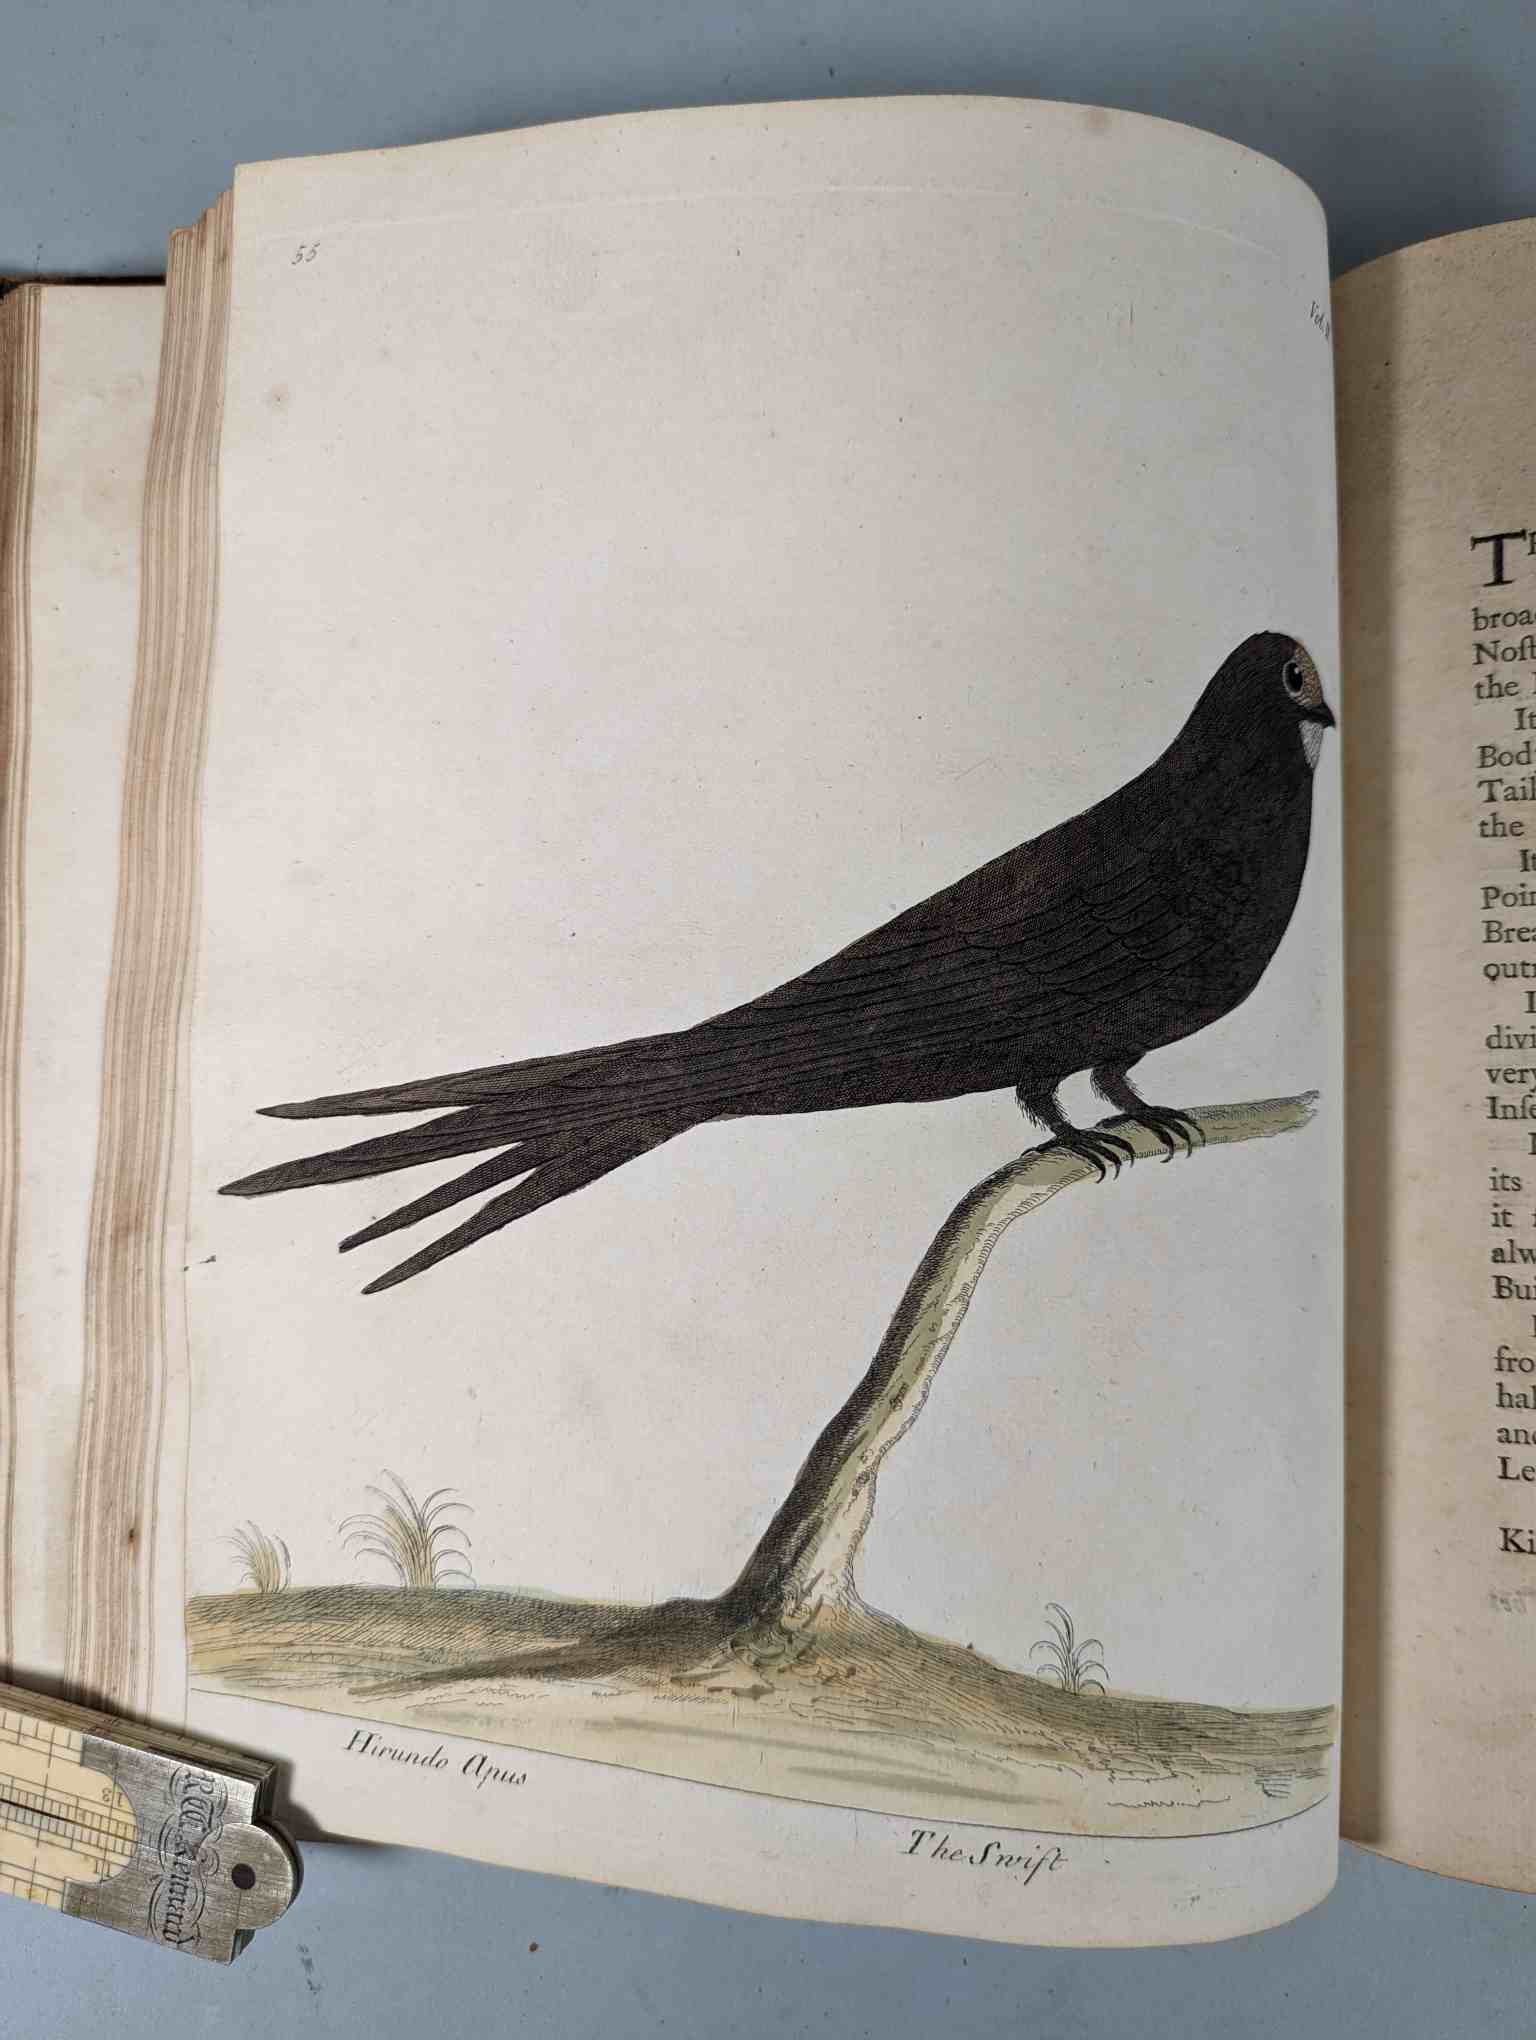 ALBIN, Eleazar. A Natural History of Birds, to which are added, Notes and Observations by W. - Image 159 of 208